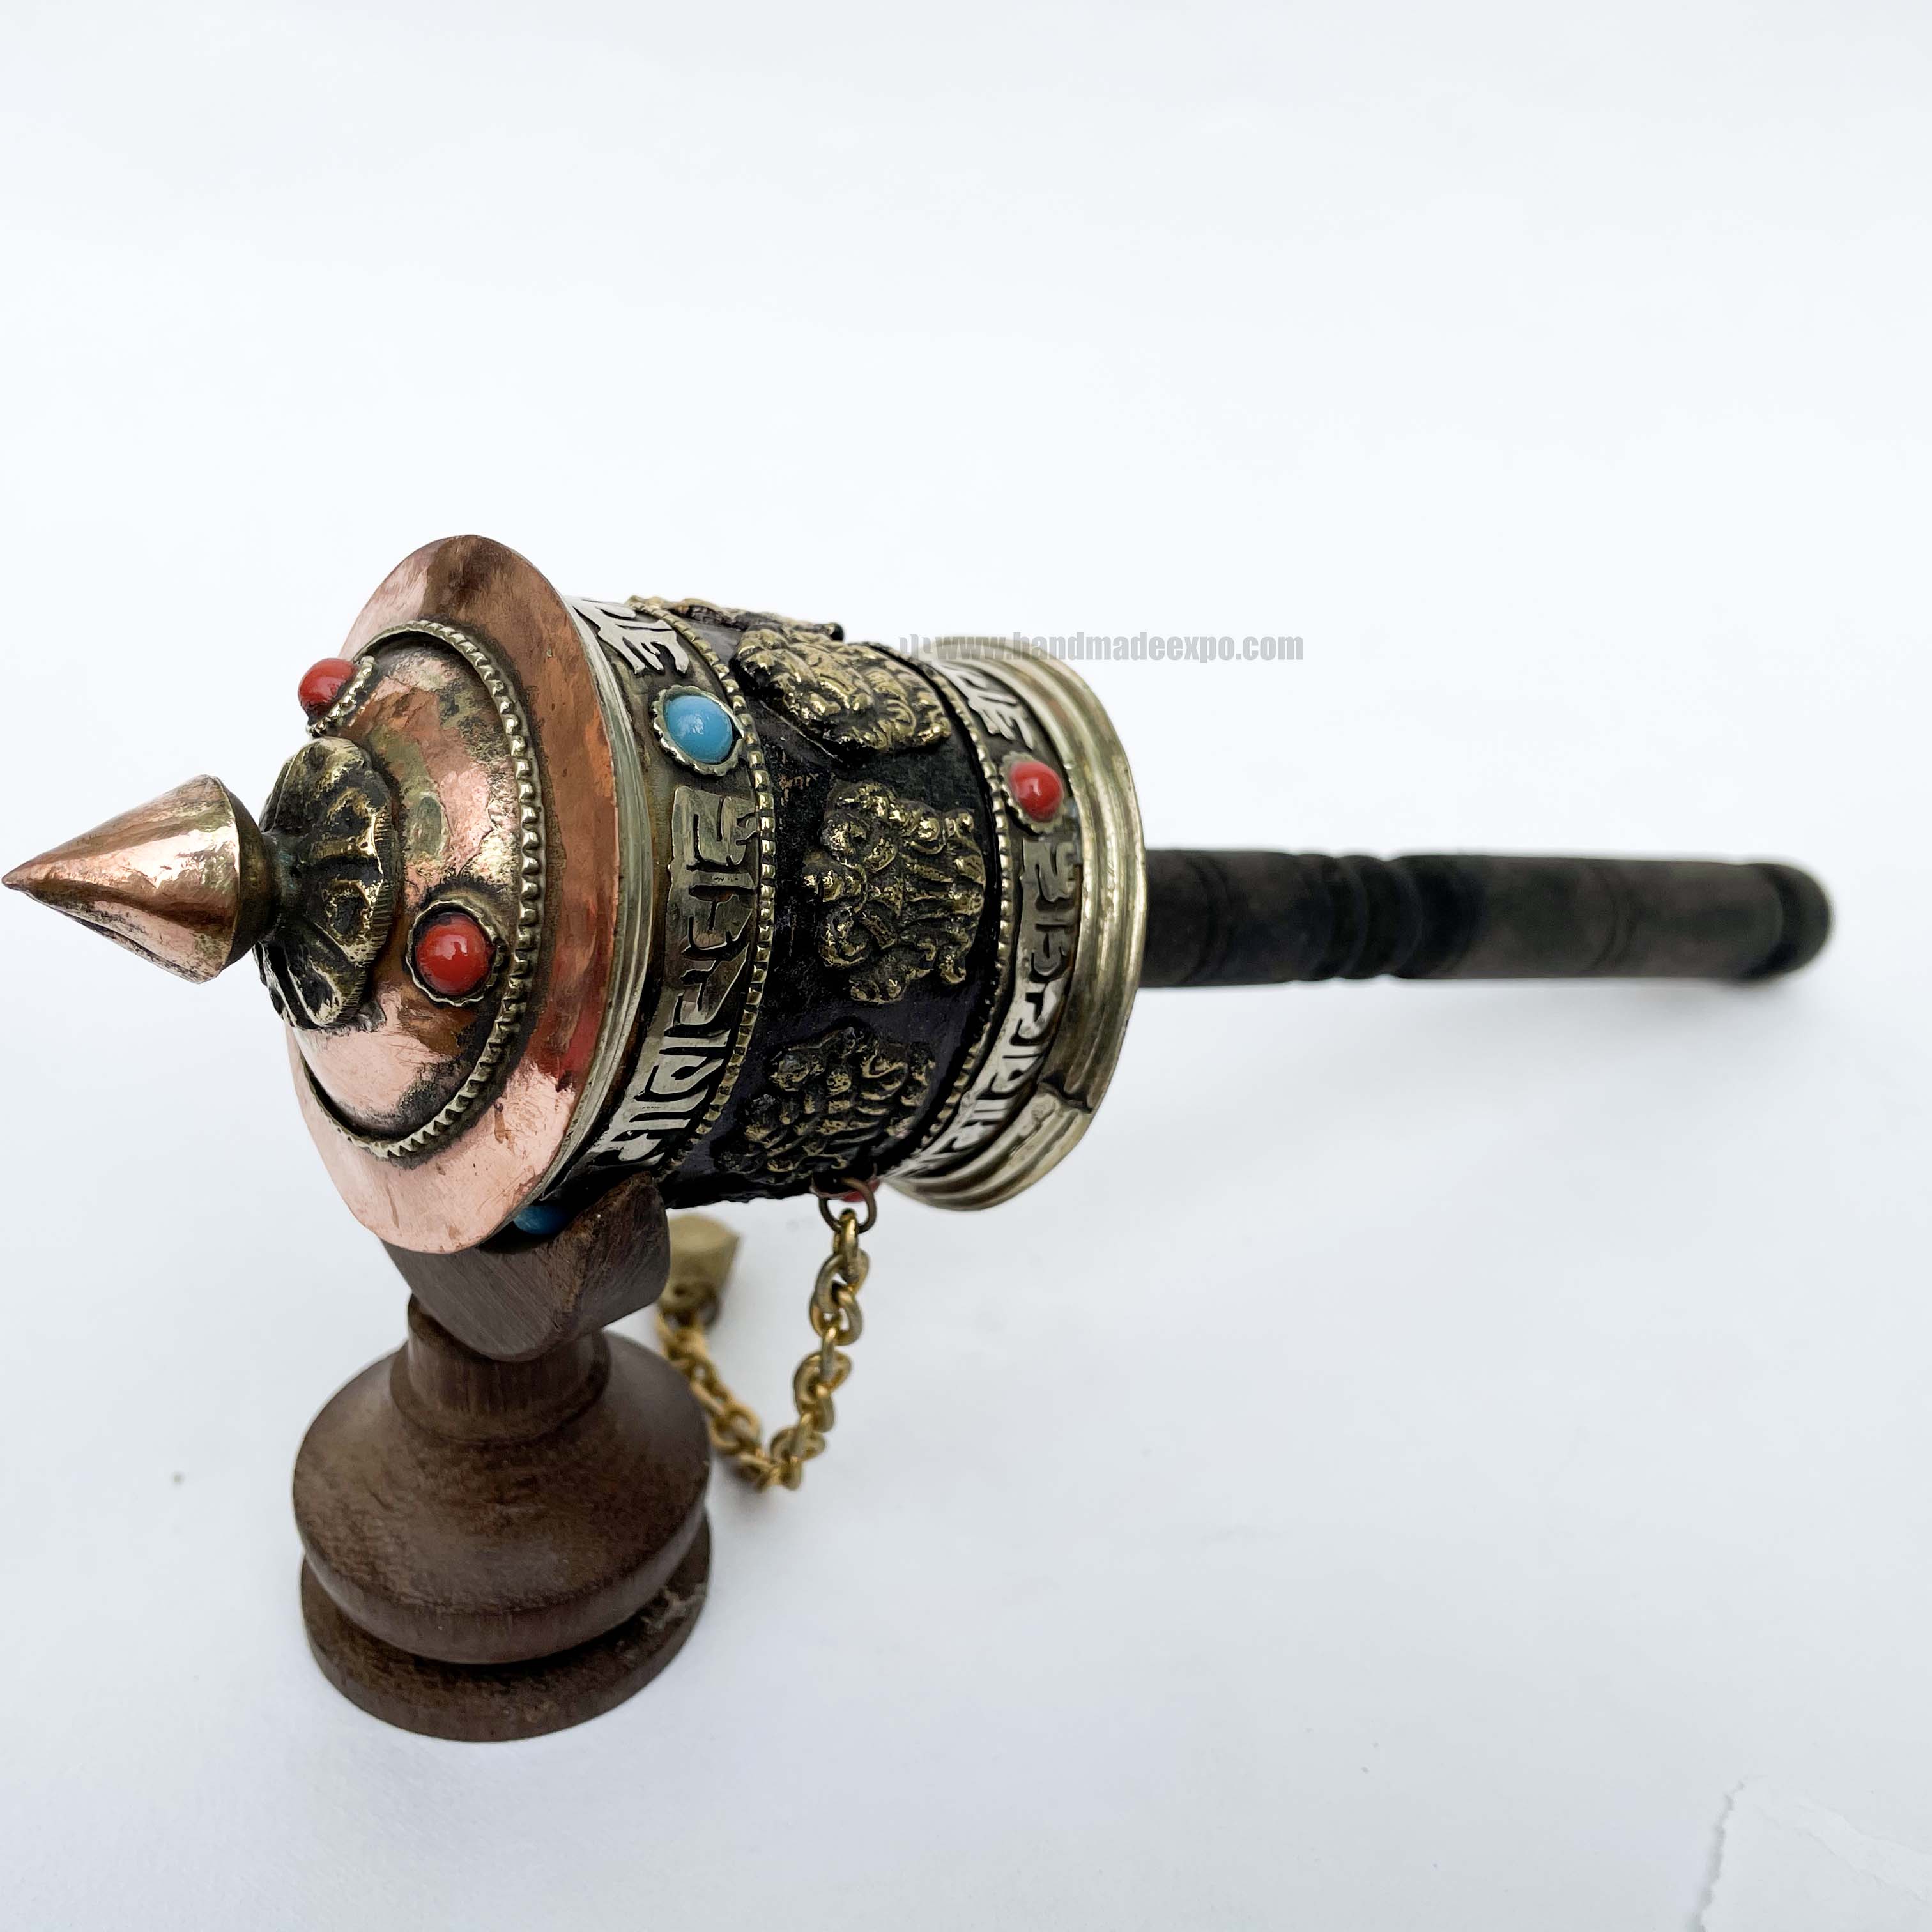 Brass Hand Held With Mantra Prayer Wheel, stone Setting, Black And Golden Color